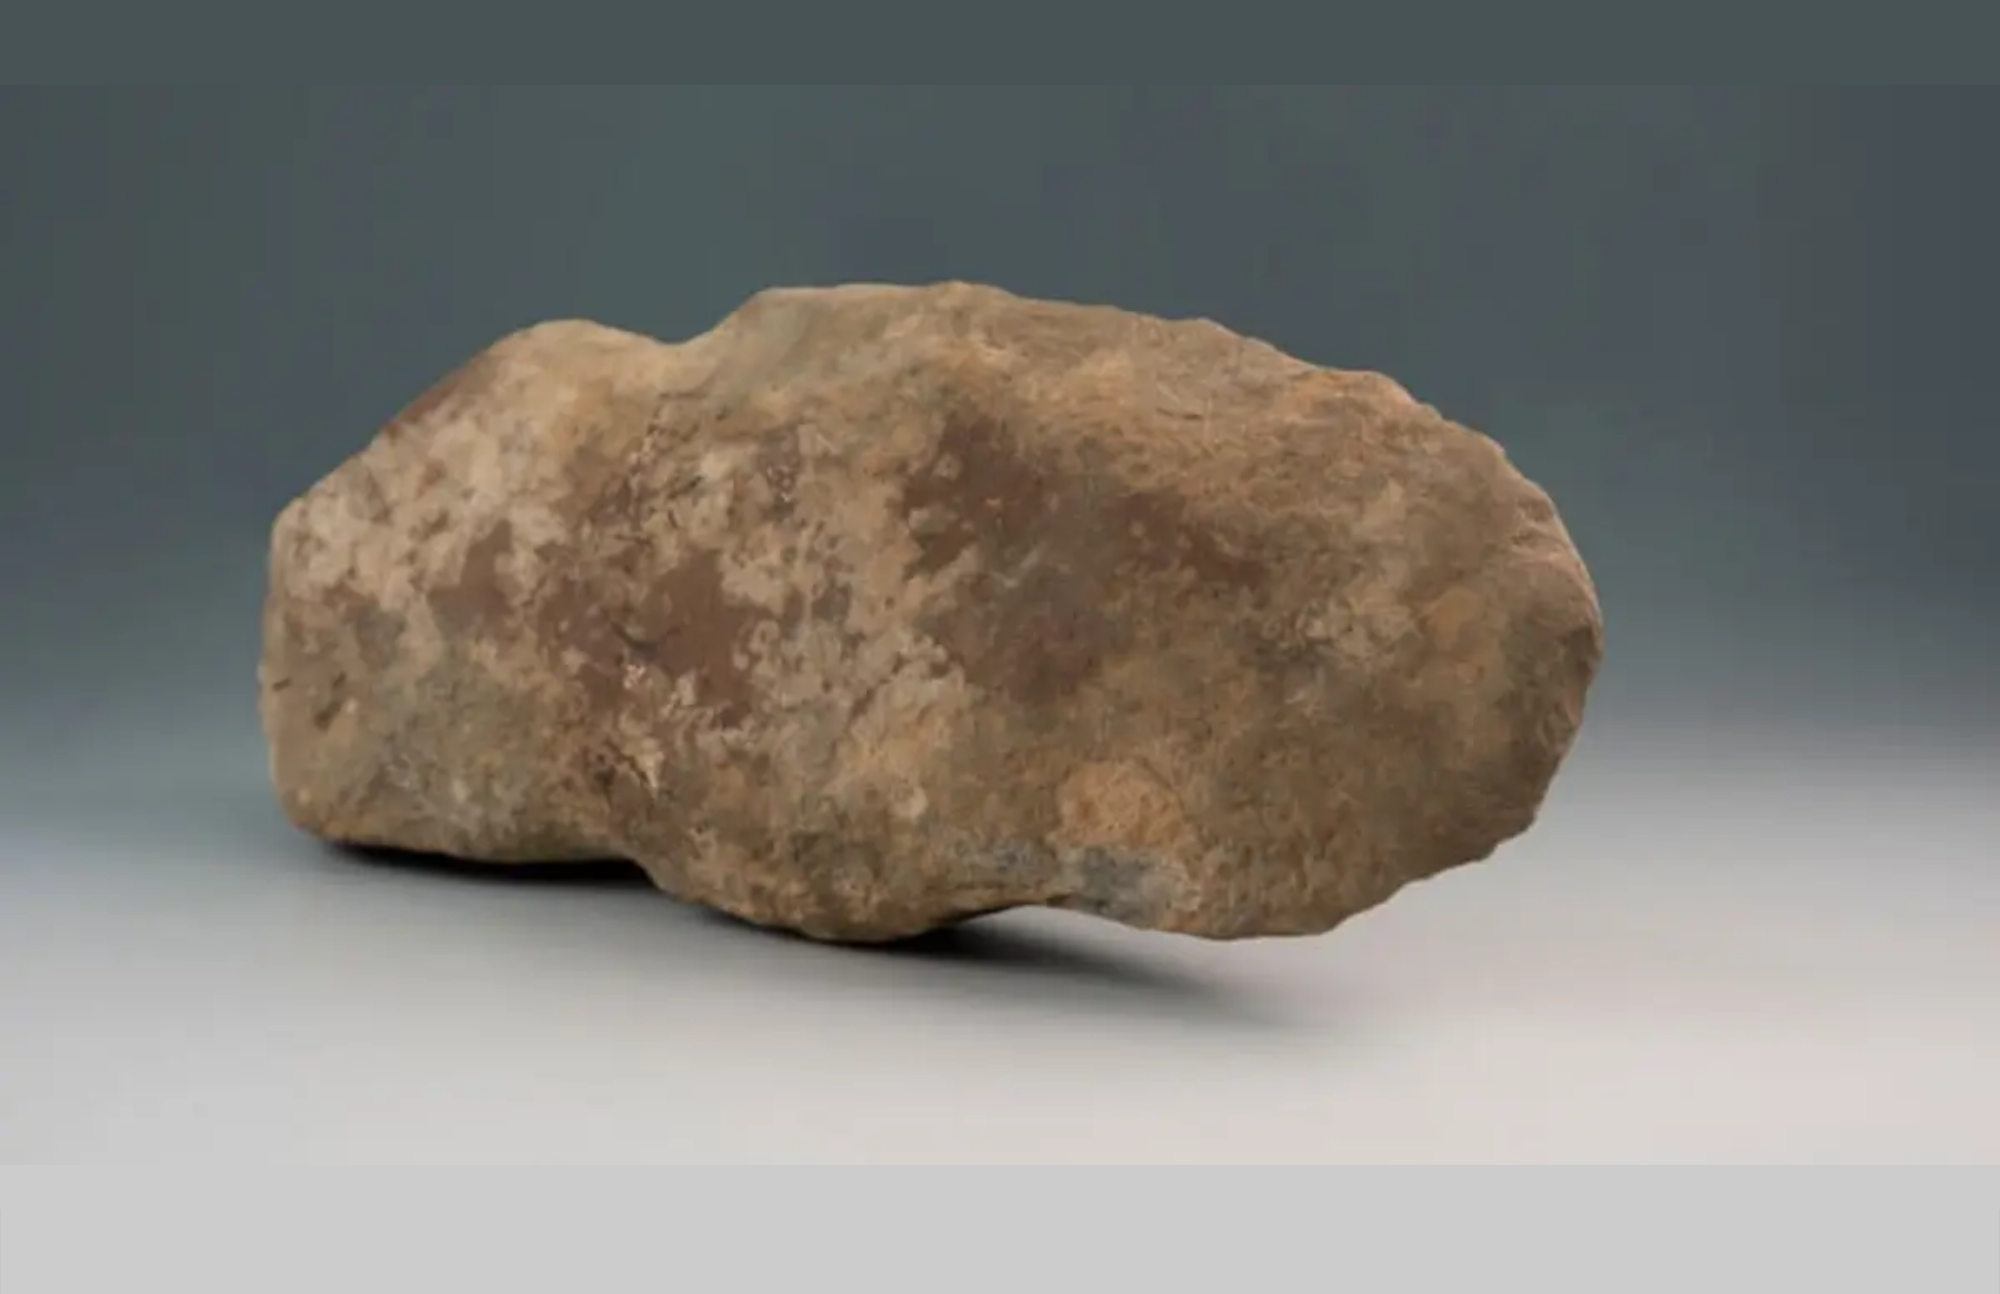 The 6,000-Year-Old Ax Stone Discovered At Mount Vernon By A Group Of Students